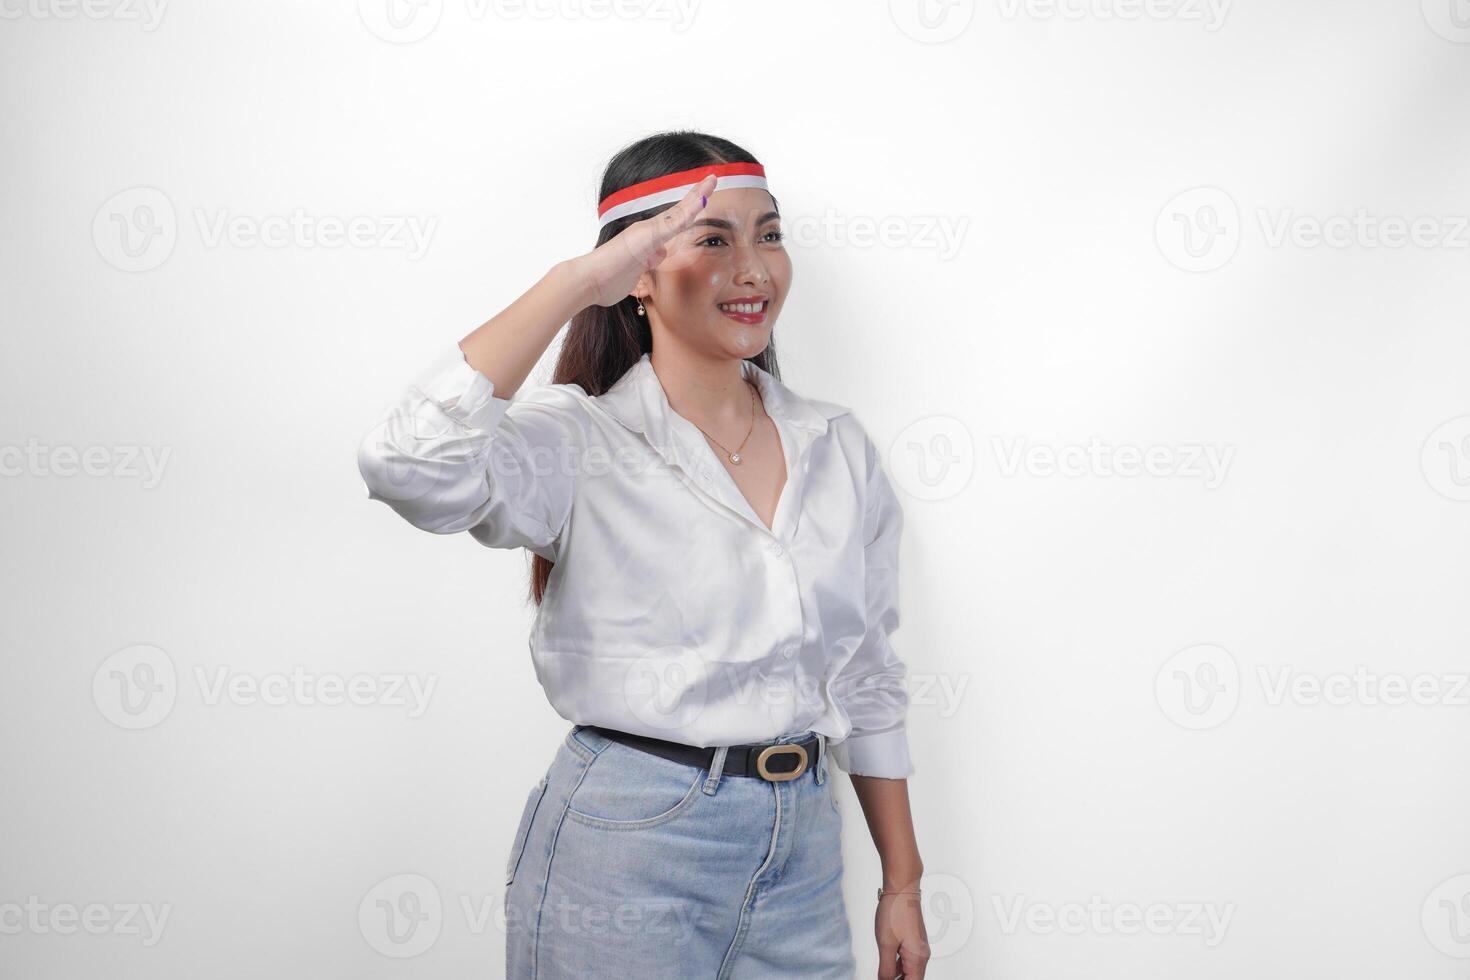 Beautiful young Asian woman wearing casual outfit and flag headband gesturing salute gesture with copy space isolated on white background. Indonesian independence day concept photo